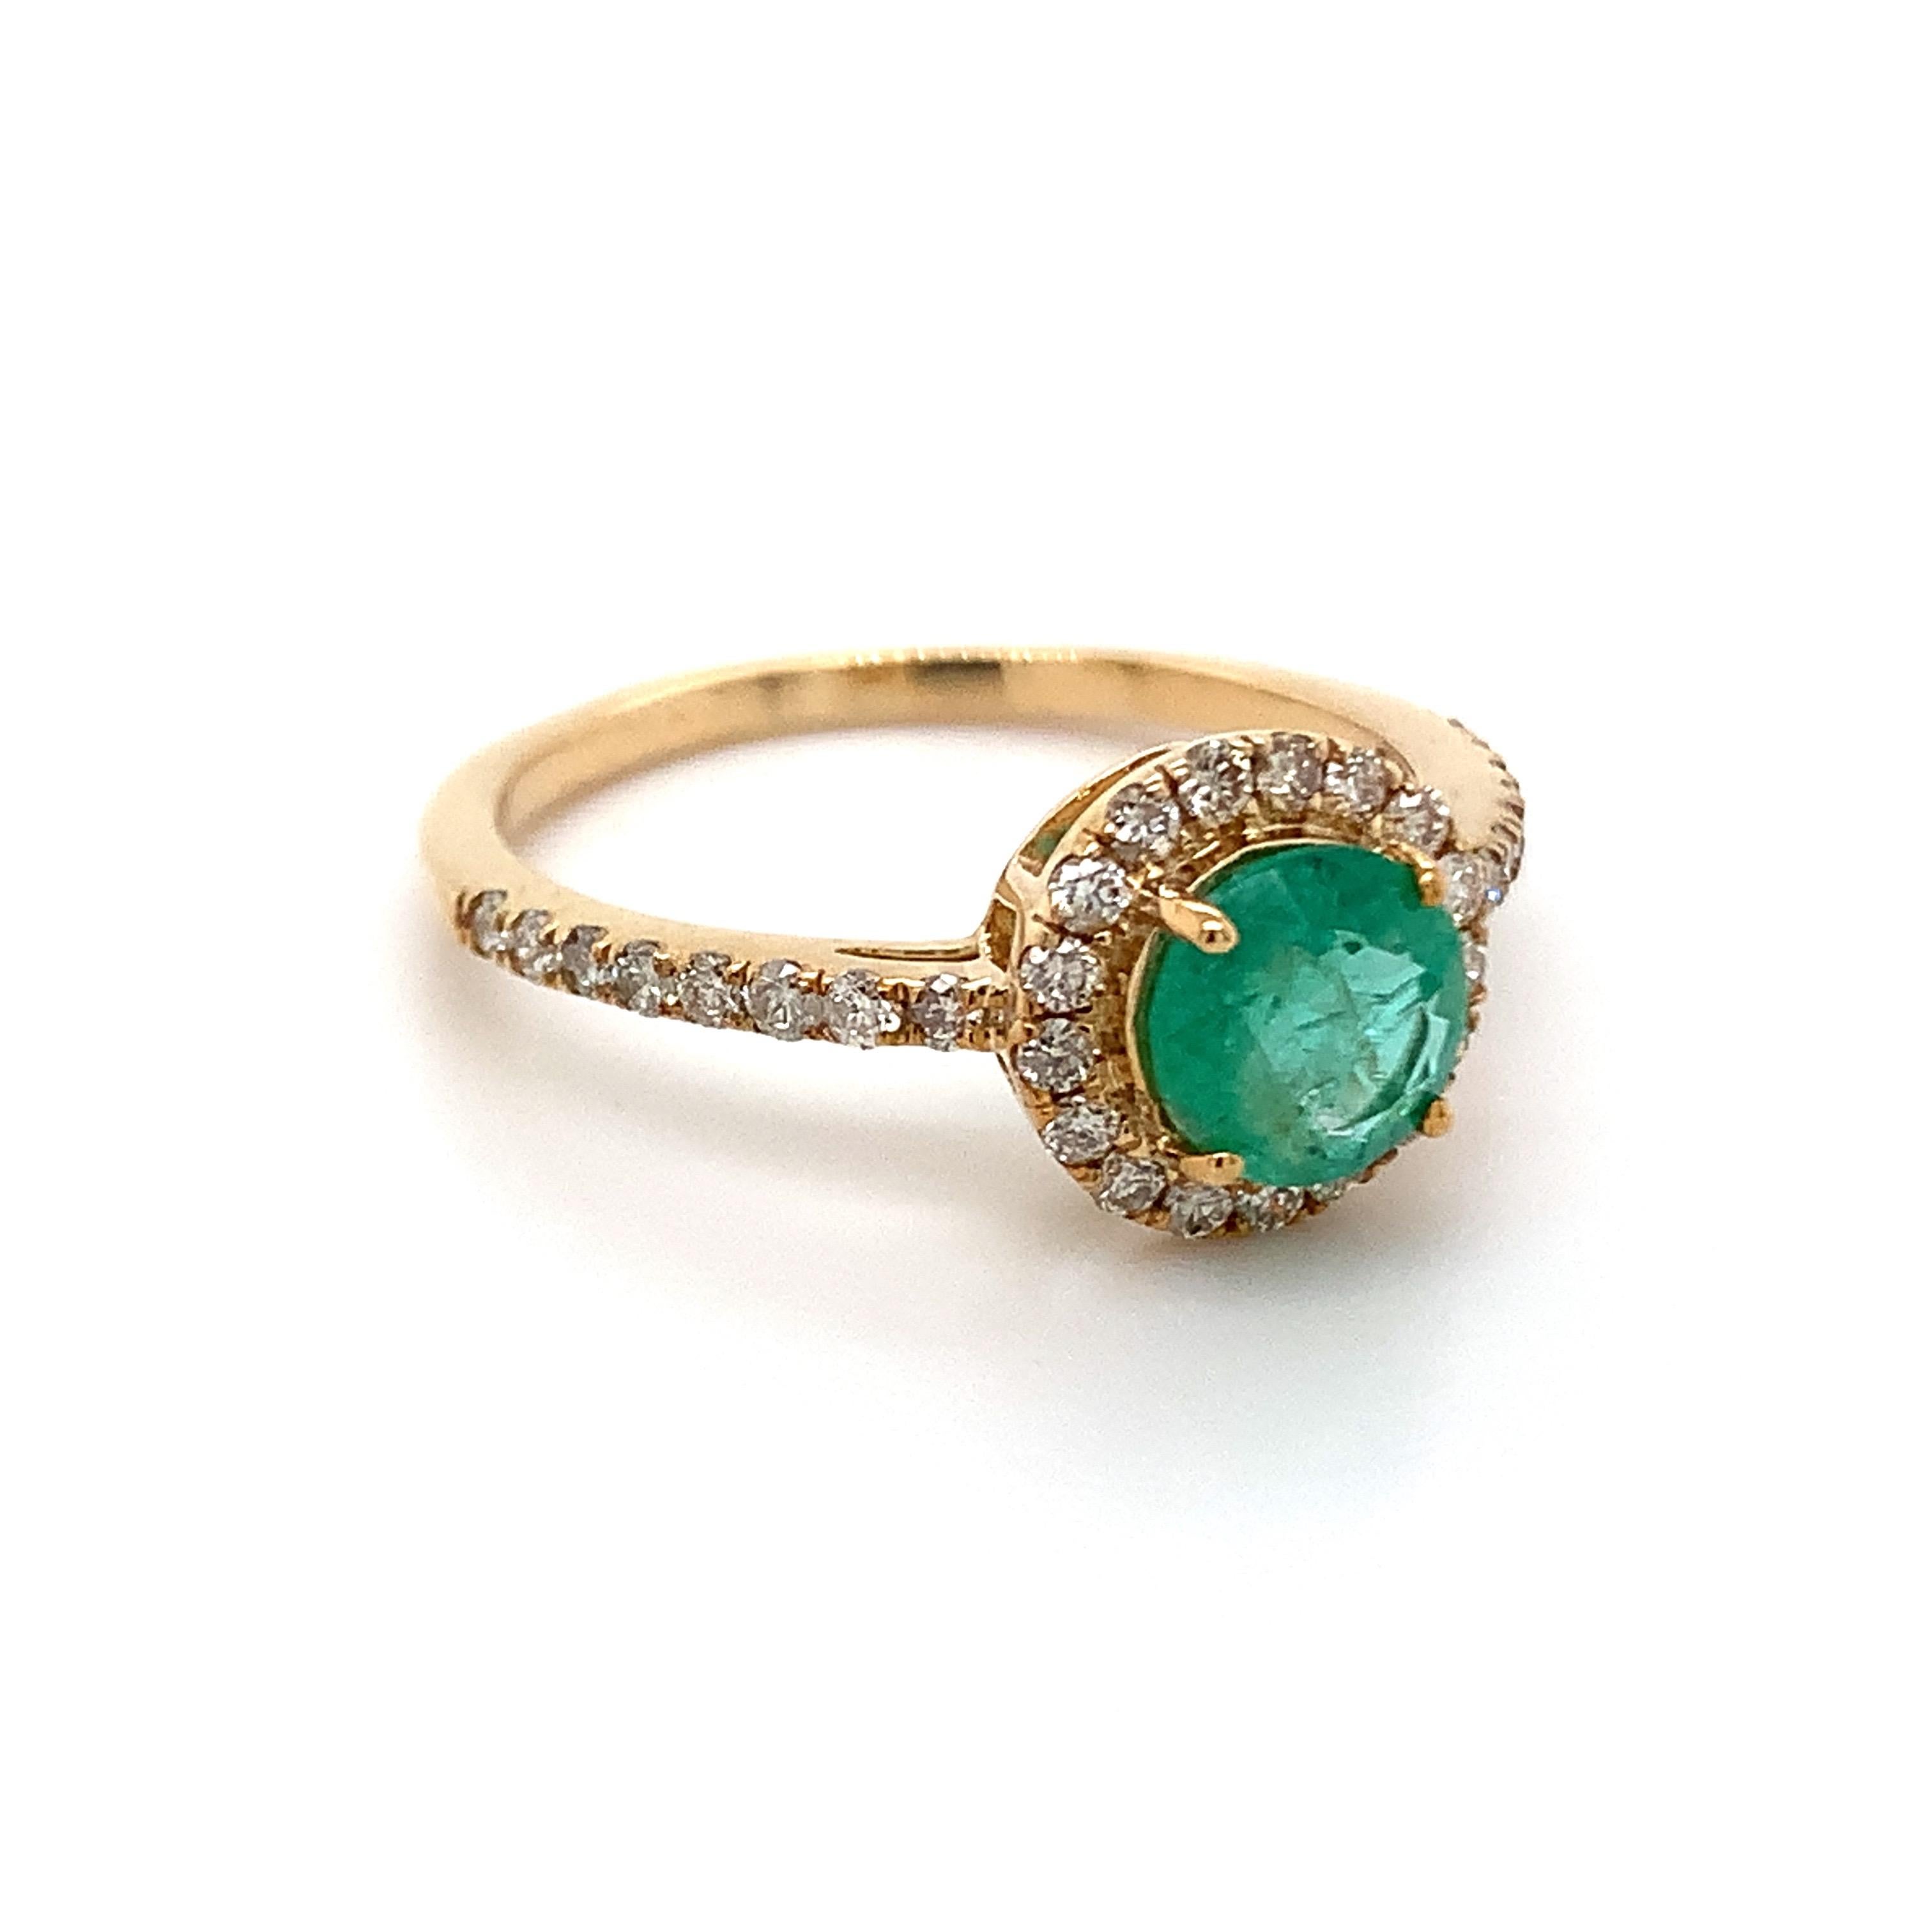 Round shape emerald gemstone beautifully crafted in a 10K yellow gold ring with natural diamonds.

With a vibrant green color hue. The birthstone for May is a symbol of renewed spring growth. Explore a vast range of precious stone Jewelry in our